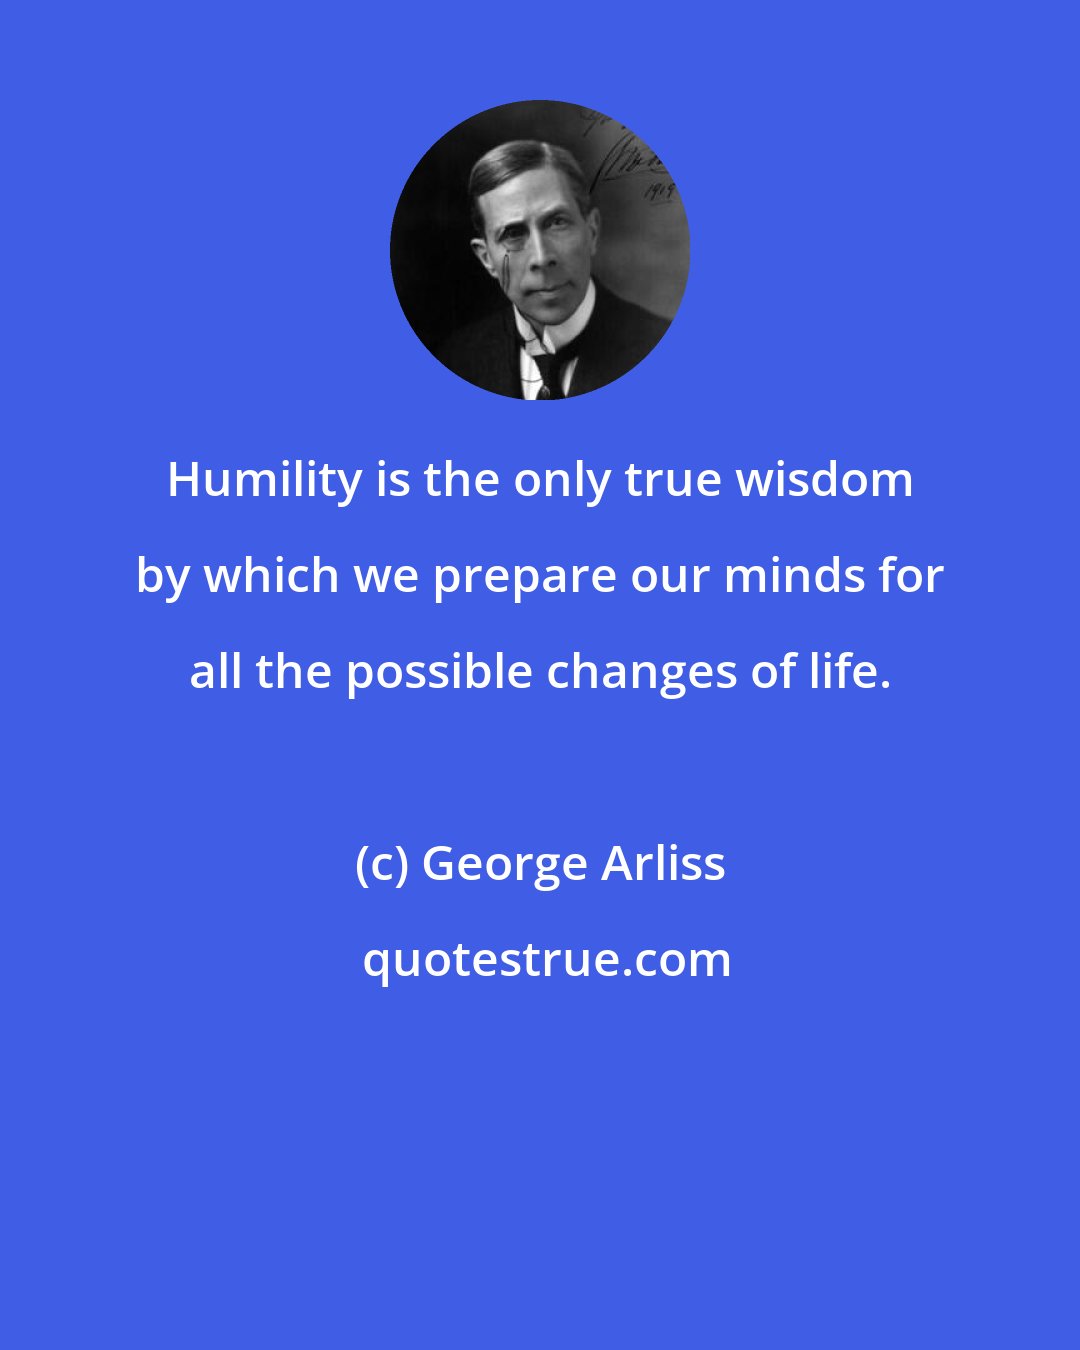 George Arliss: Humility is the only true wisdom by which we prepare our minds for all the possible changes of life.